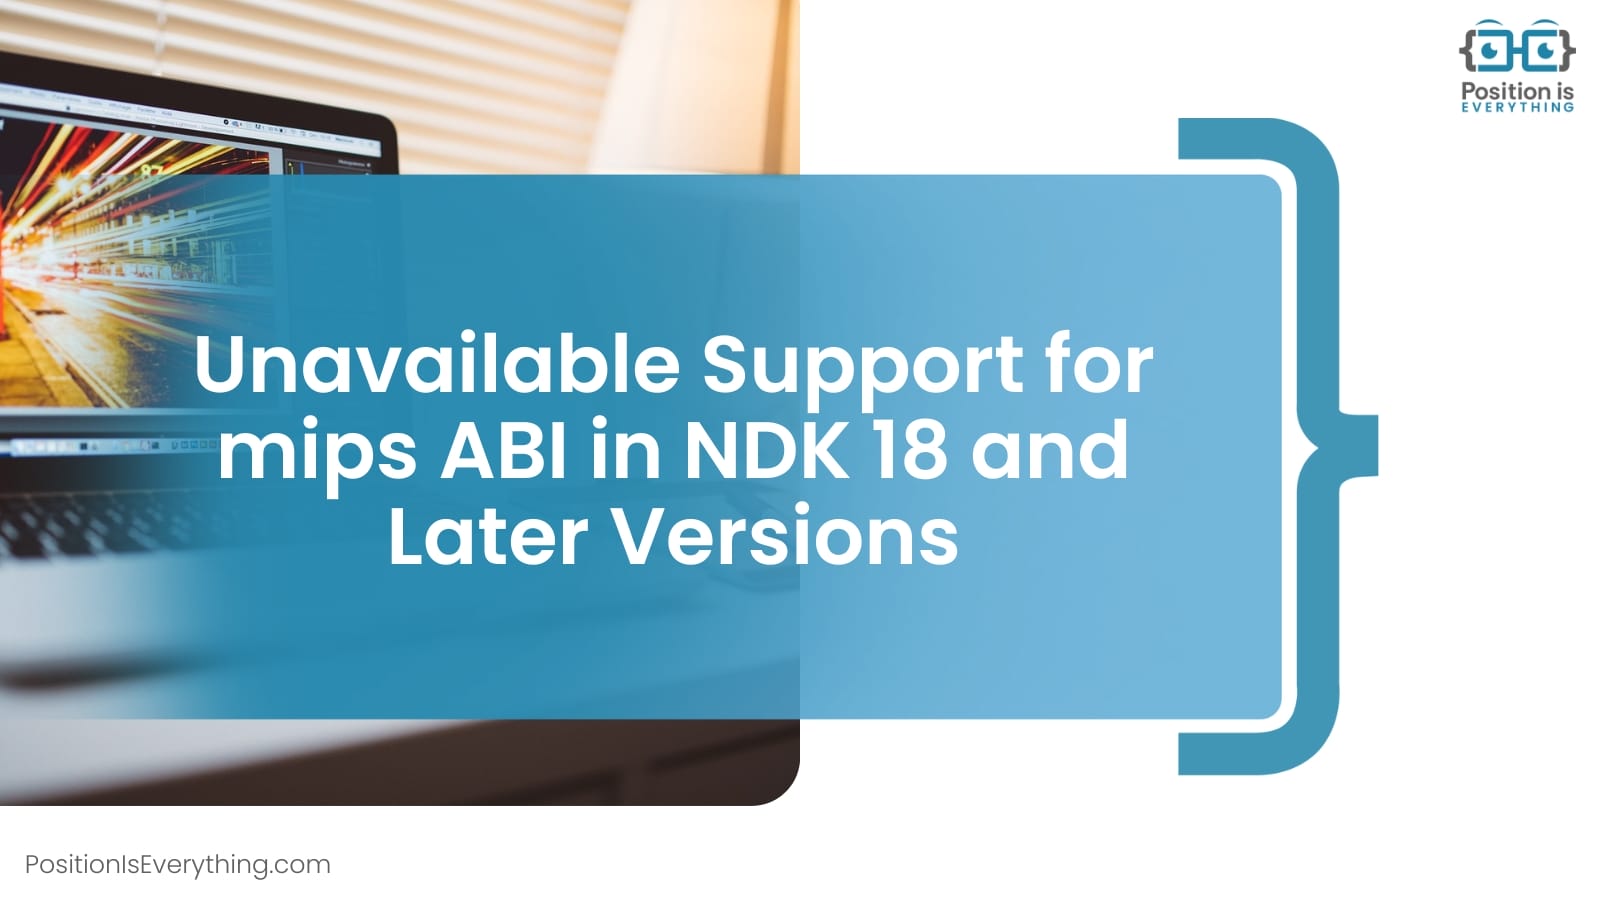 Unavailable Support for mips ABI in NDK 18 and Later Versions